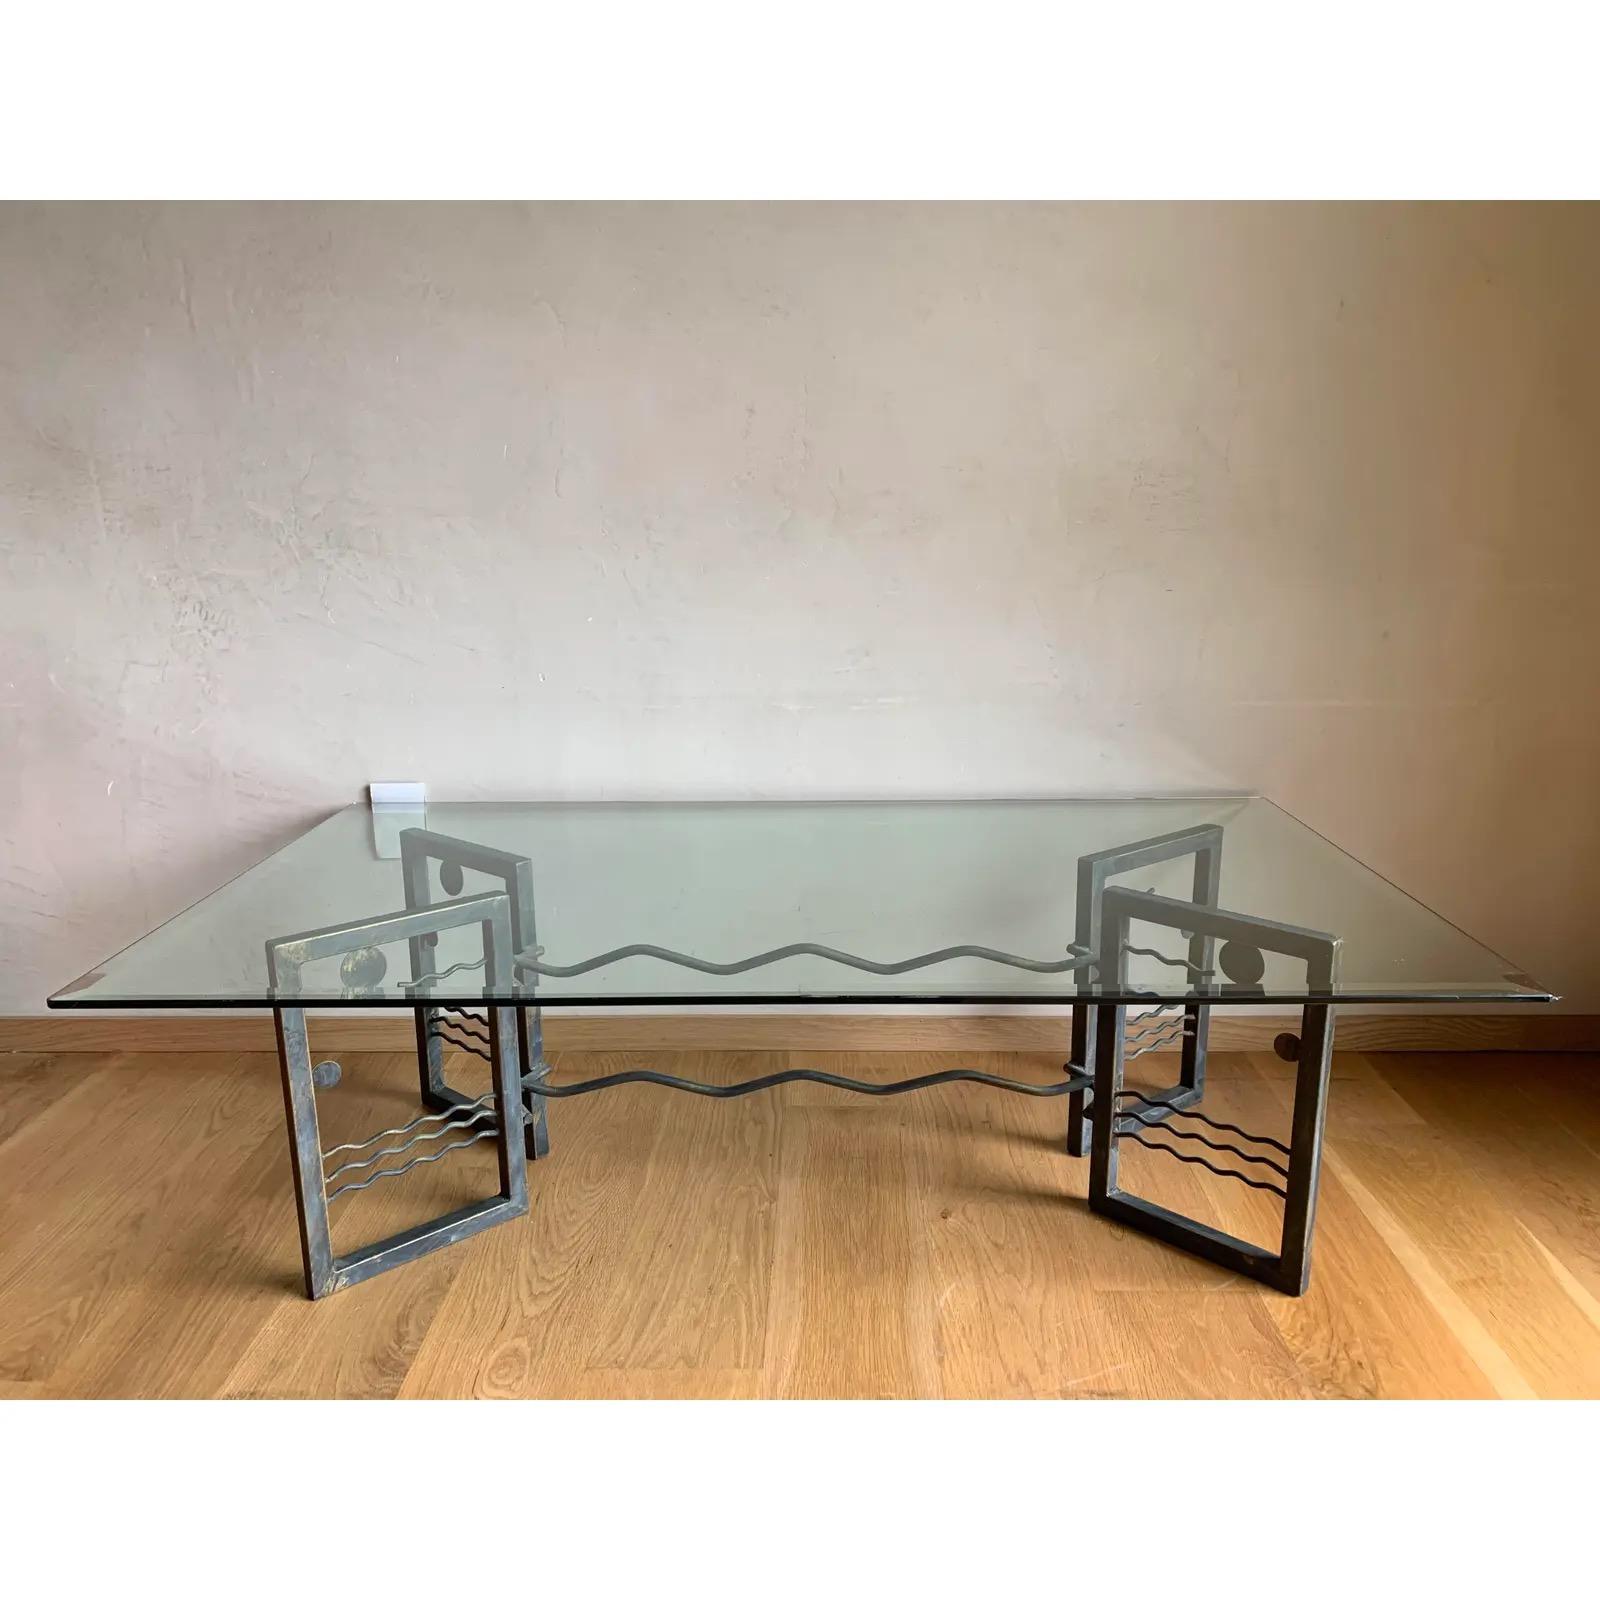 Outrageous, artist-made welded iron Memphis Style coffee table depicting celestial scene or stylized sky. Heavy beveled glass top.
